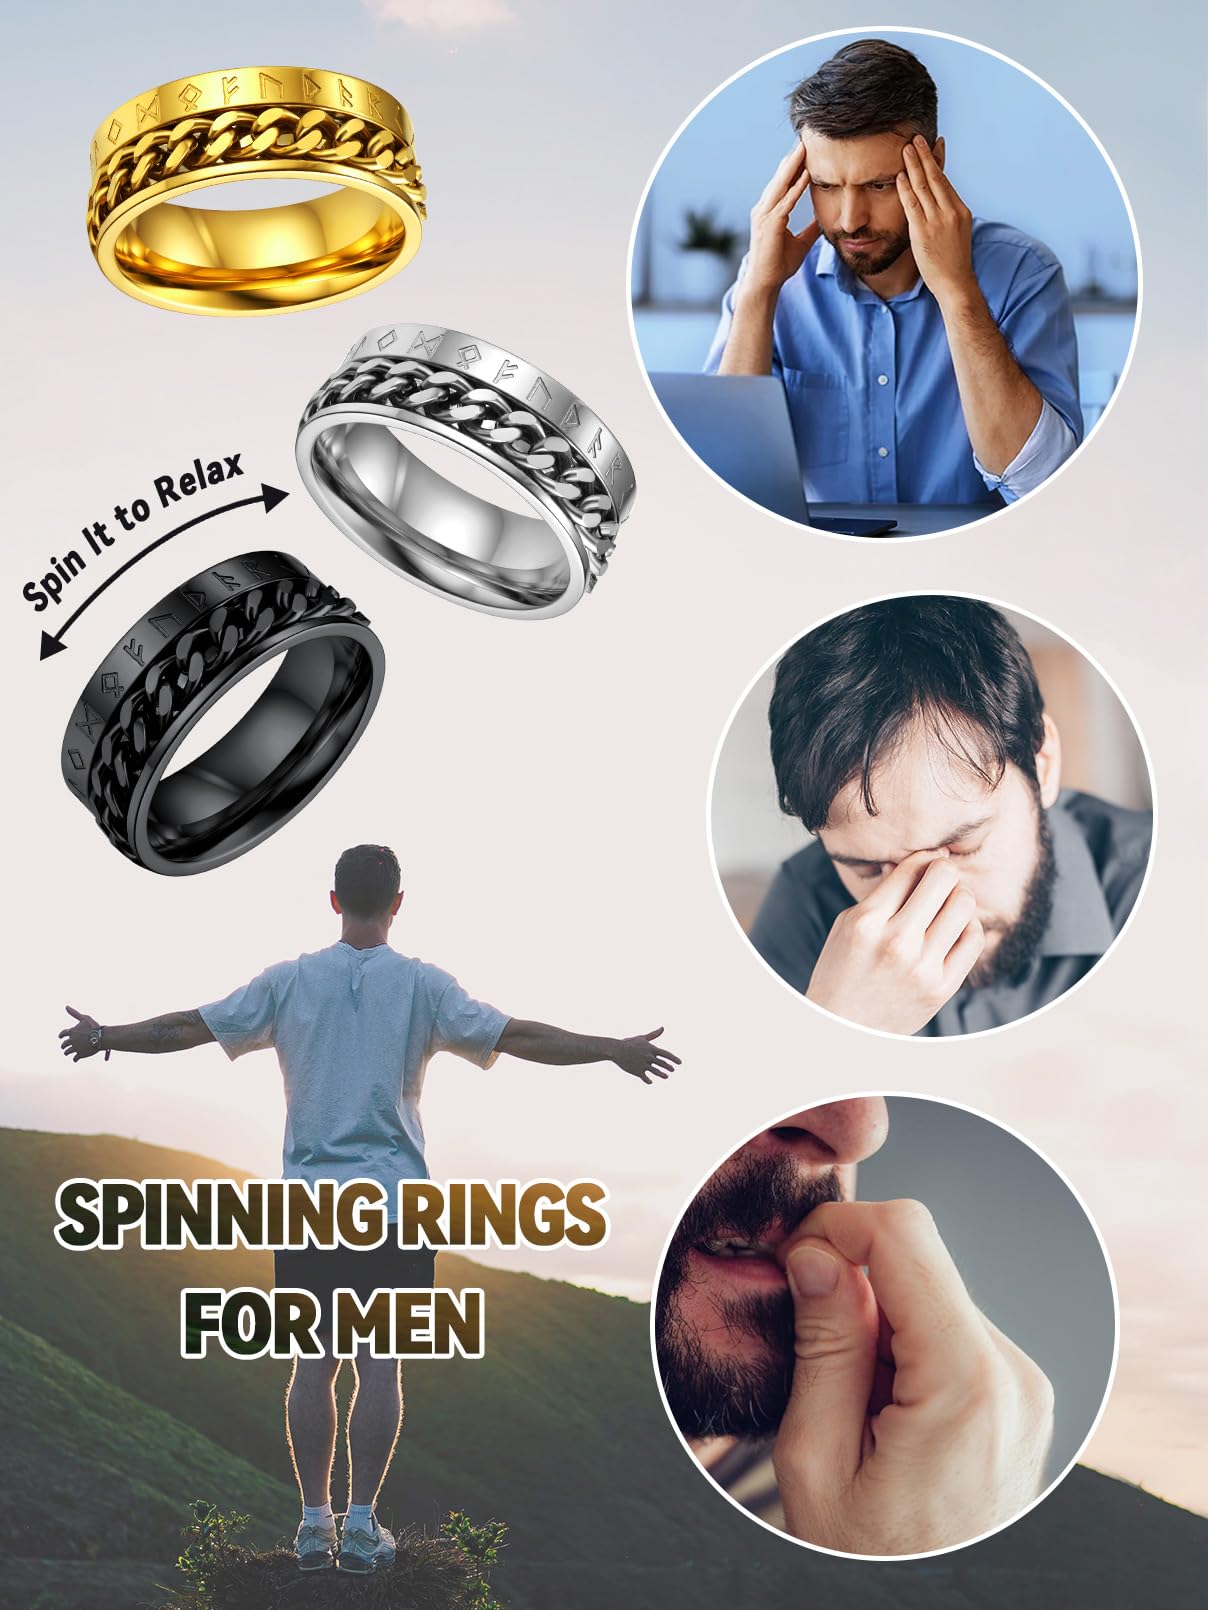 FaithHeart Punk Cool Boys Rings Black Steel Spinning Anxiety Ring for Men Viking Runes Rotating Band Cuban Chains Fidget Rings for Anxious Mens Ring Size Q